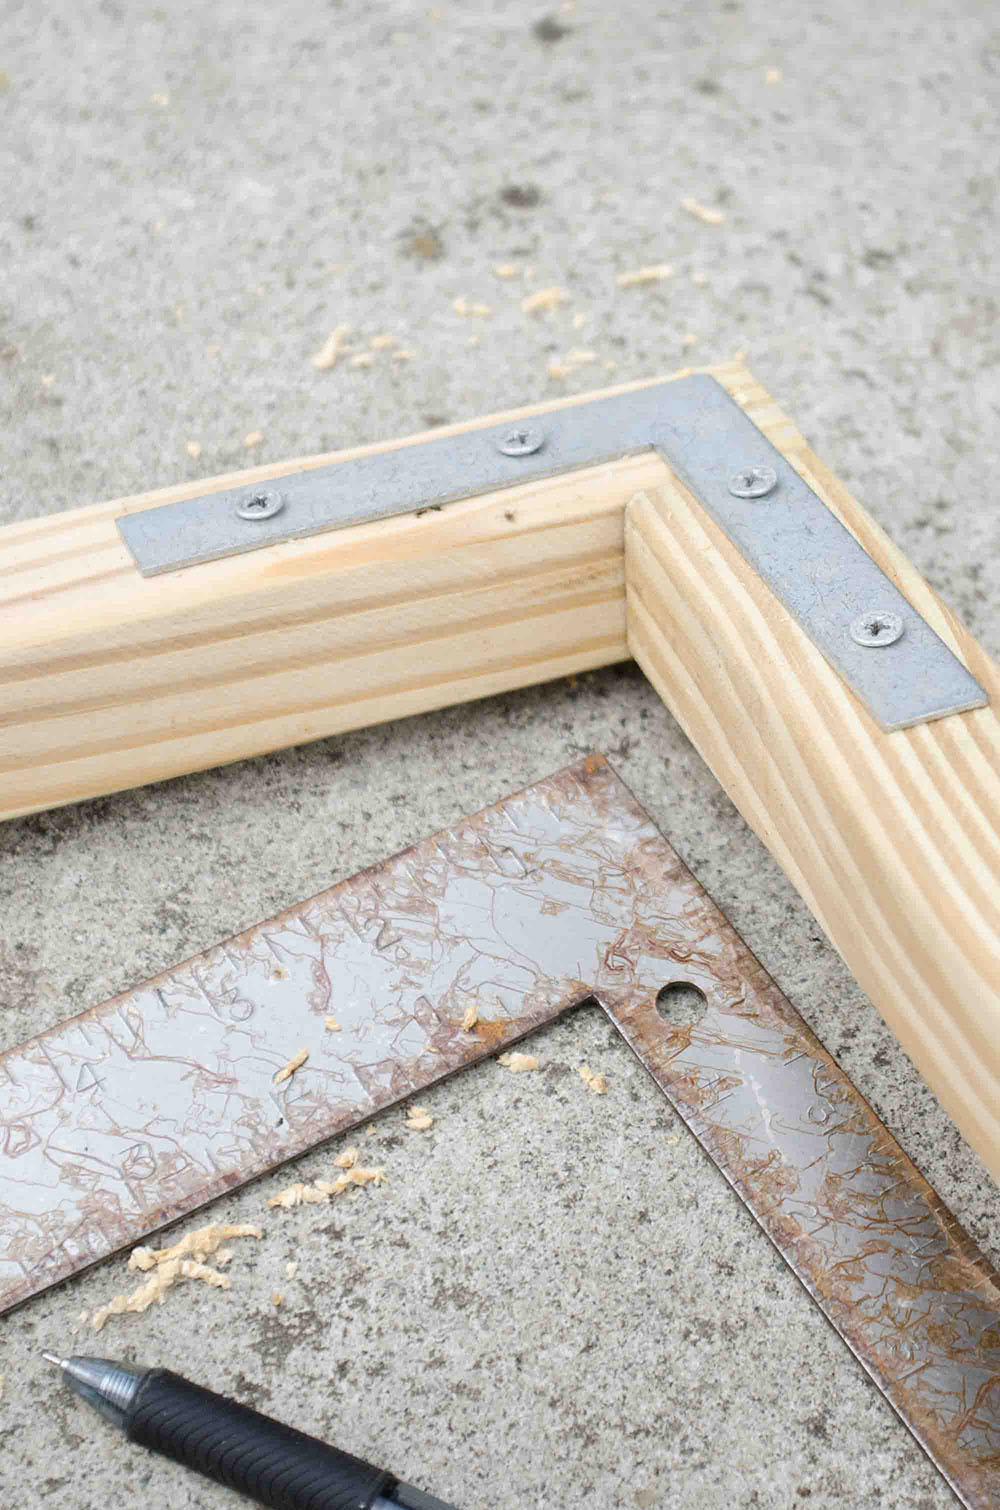 A corner brace connects two pieces of wood.